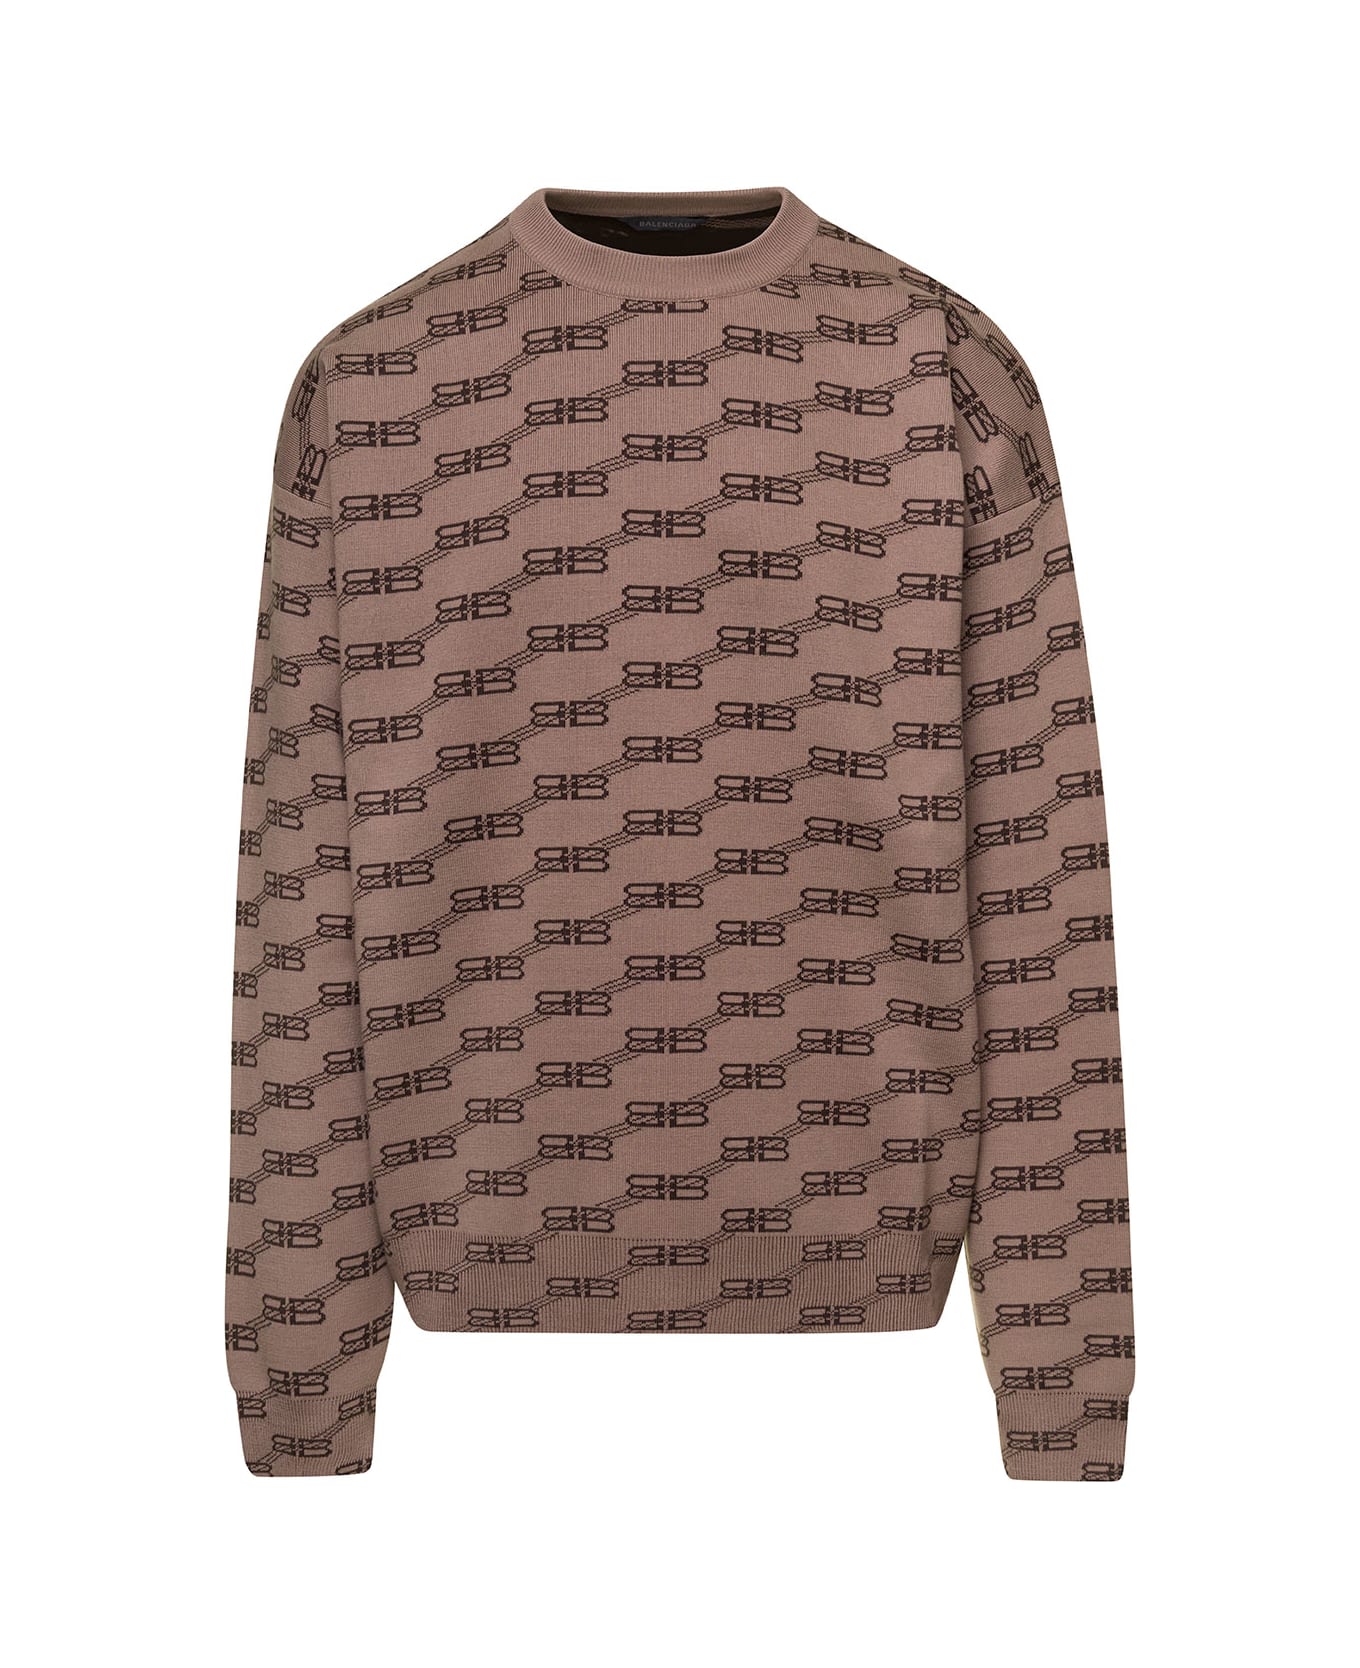 Balenciaga Beige Knit Sweater With All-over Monogram Jacquard In Cotton Blend Man - Beige